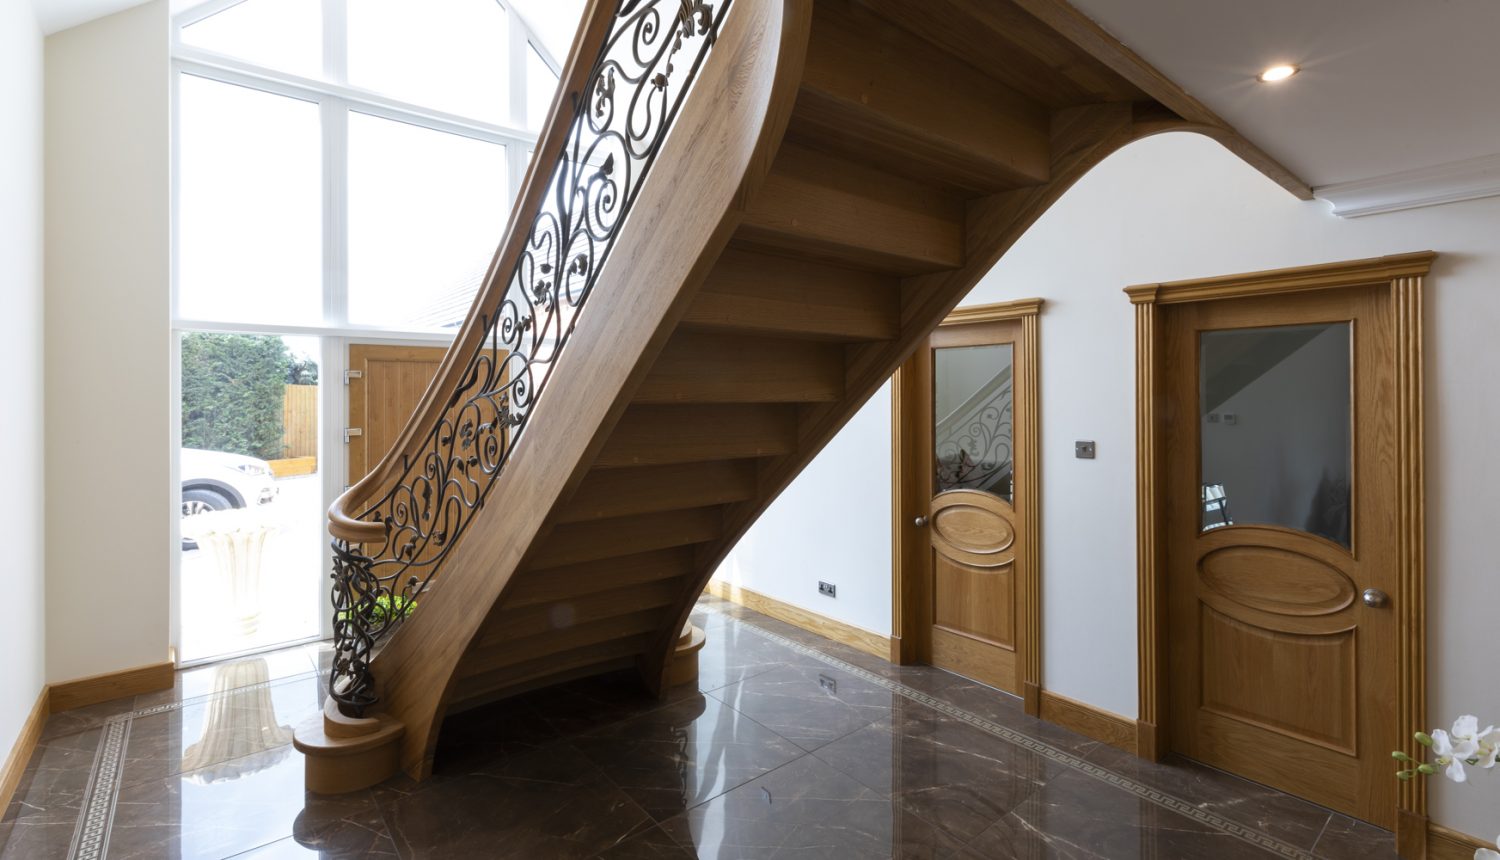 You won`t find another house with a staircase the same as yours